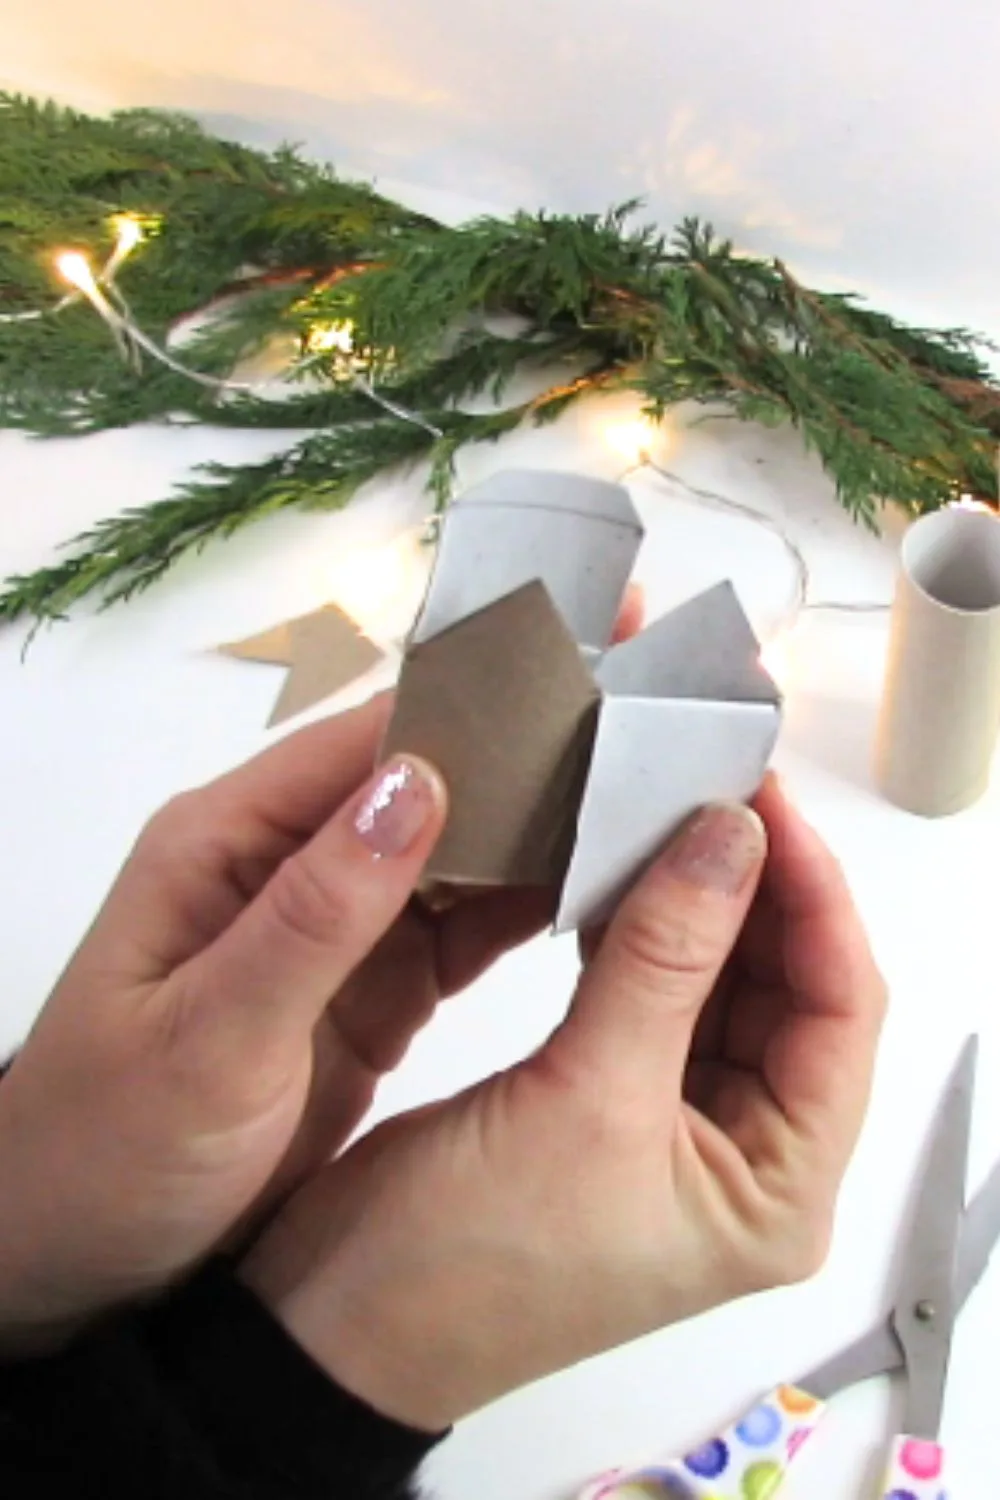 make a house out of toilet paper rolls